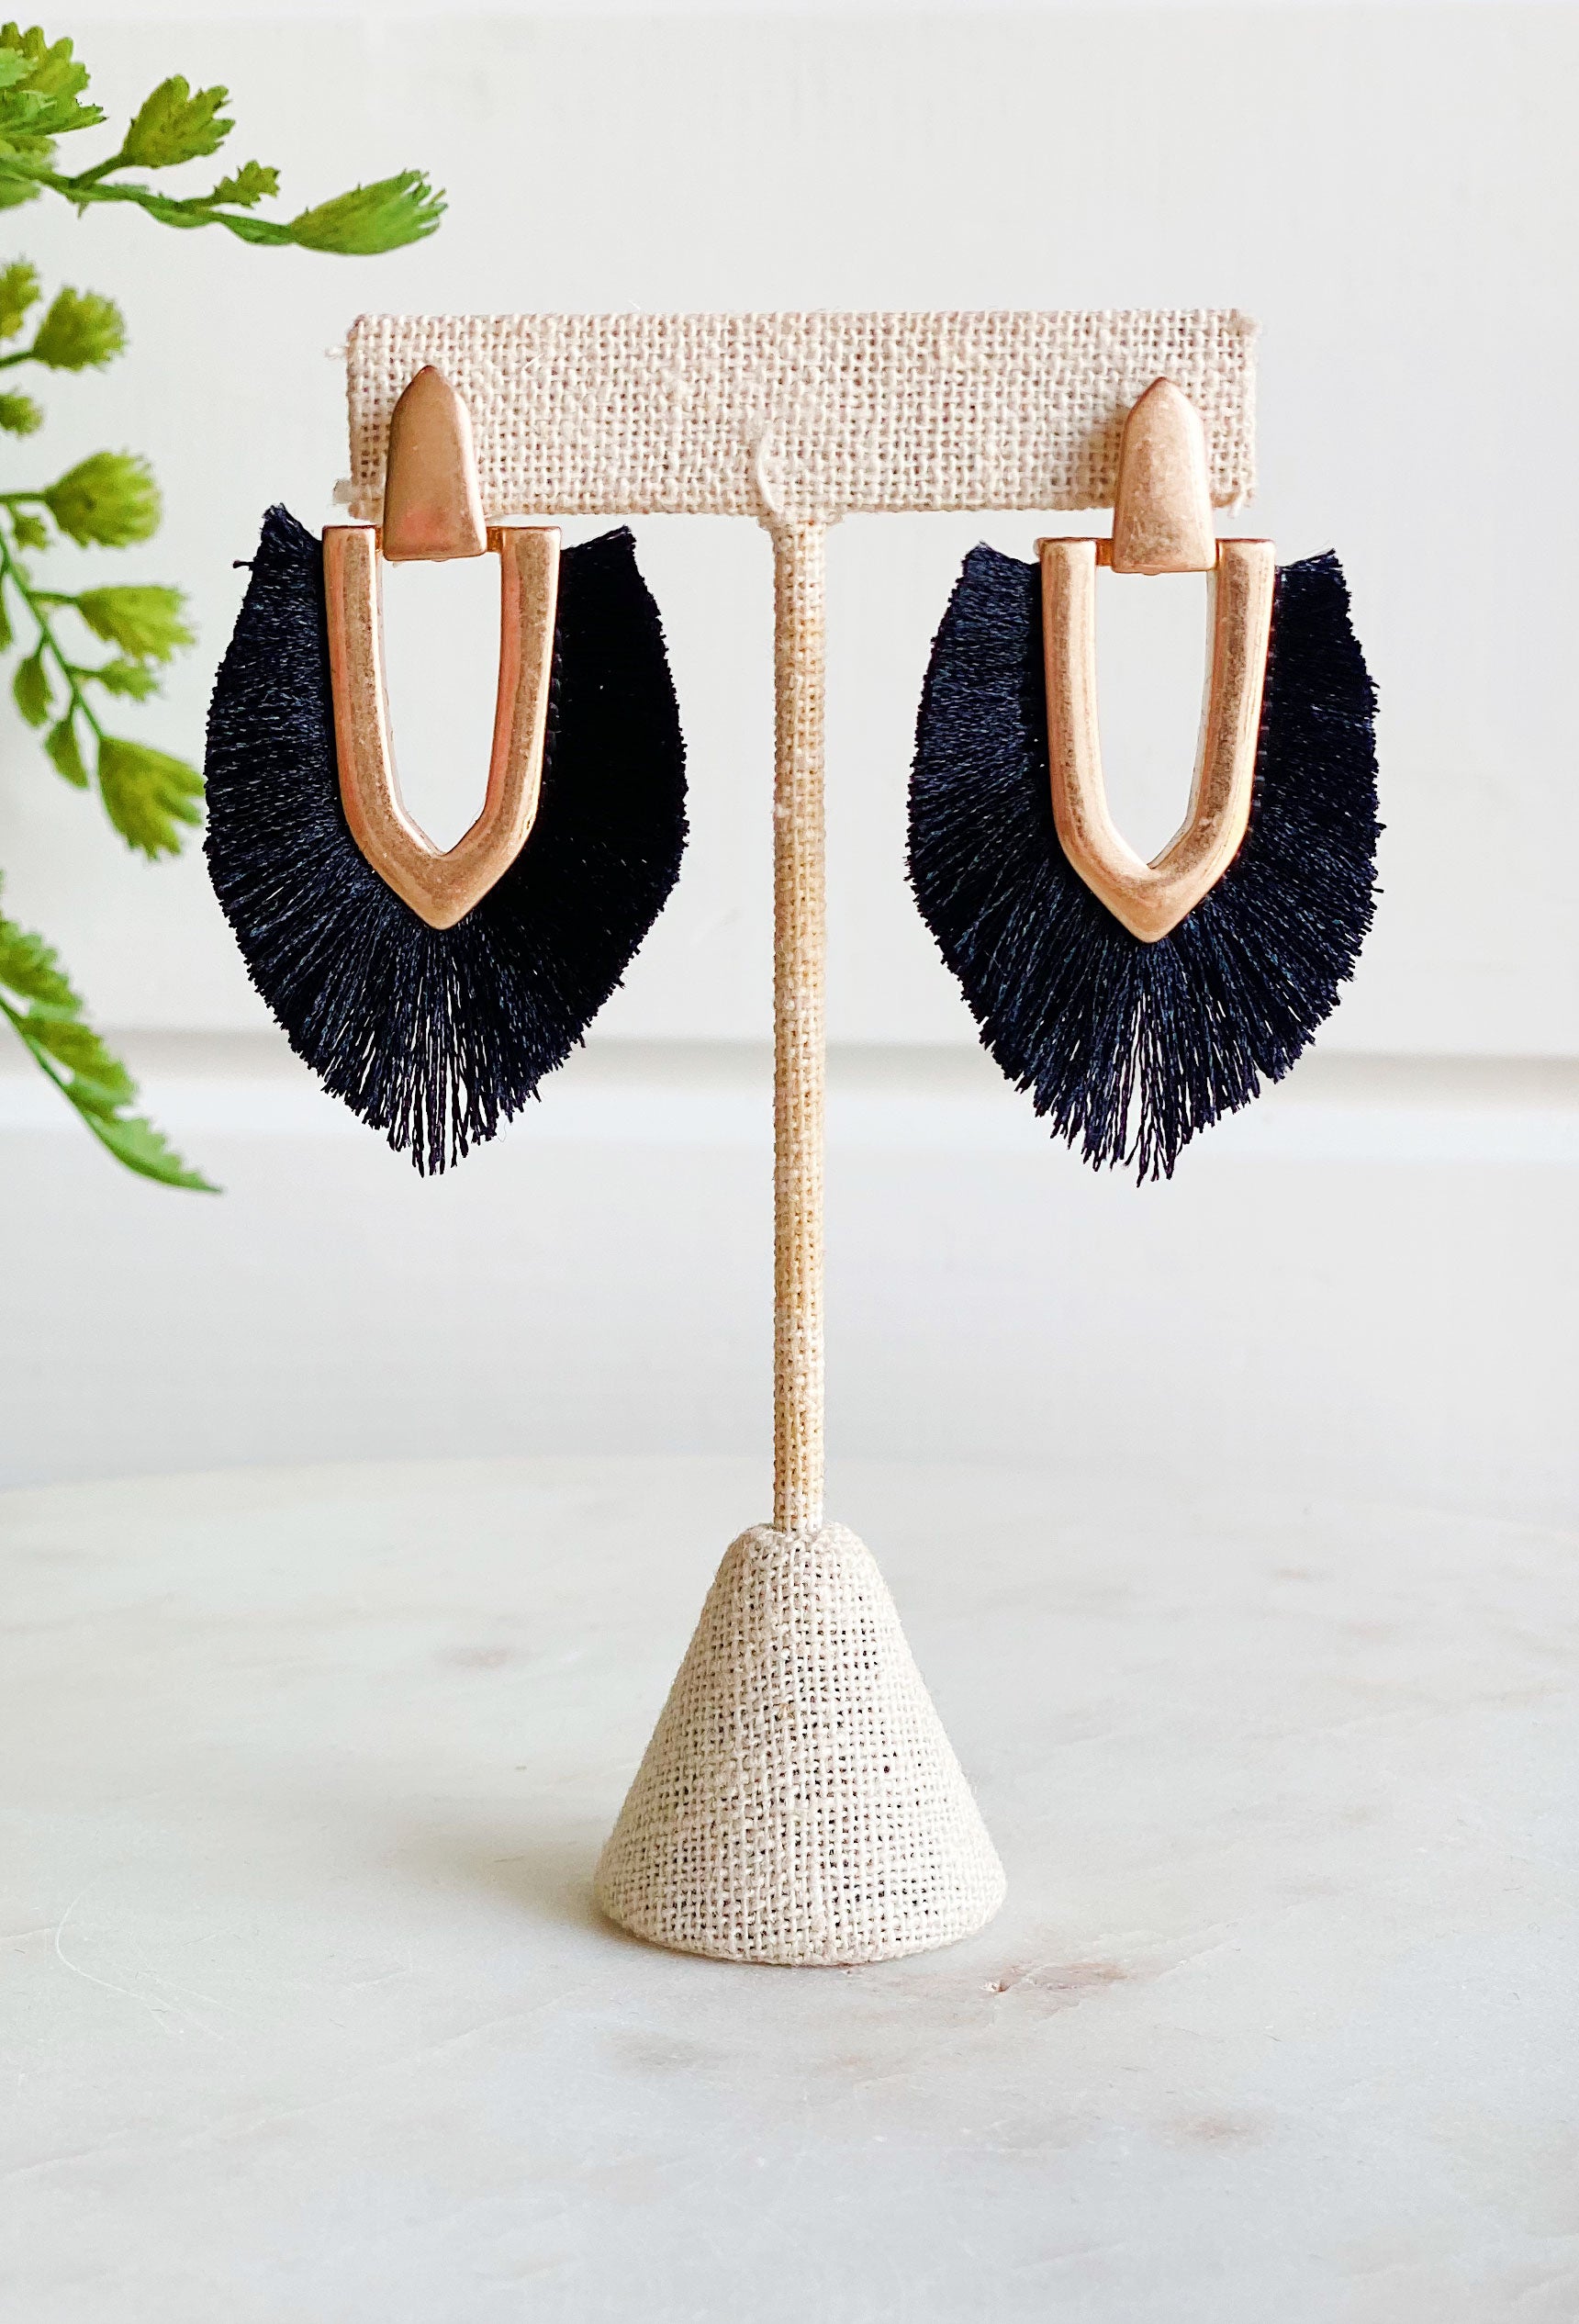 Jessie Fringe Earrings in Black, Crafted with gold and black fringe detailing